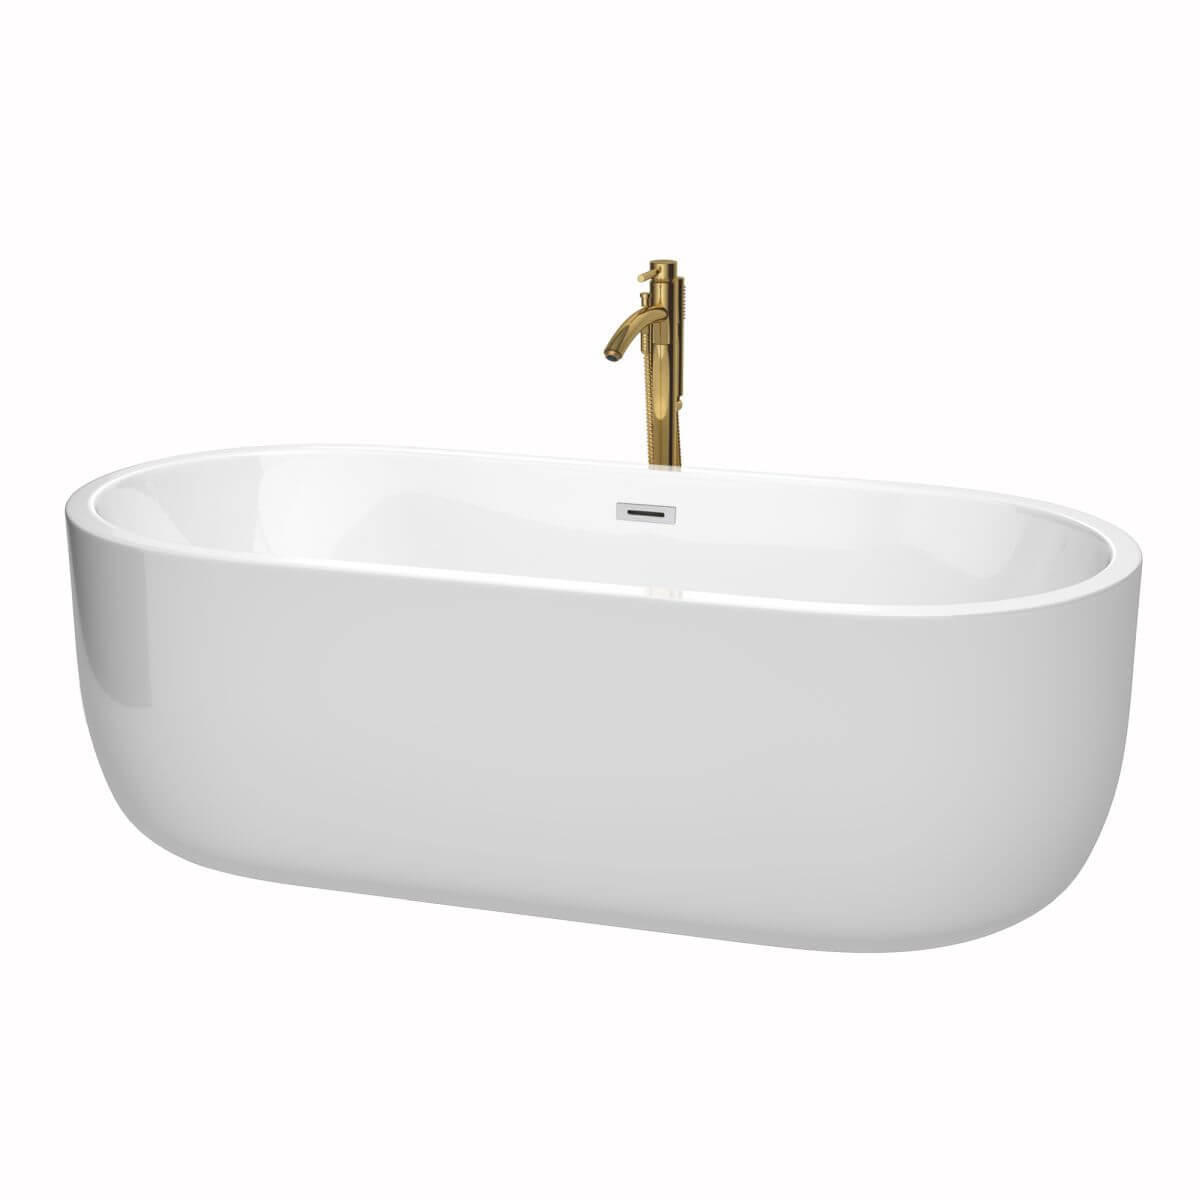 Wyndham Collection Juliette 71 inch Freestanding Bathtub in White with Polished Chrome Trim and Floor Mounted Faucet in Brushed Gold - WCOBT101371PCATPGD